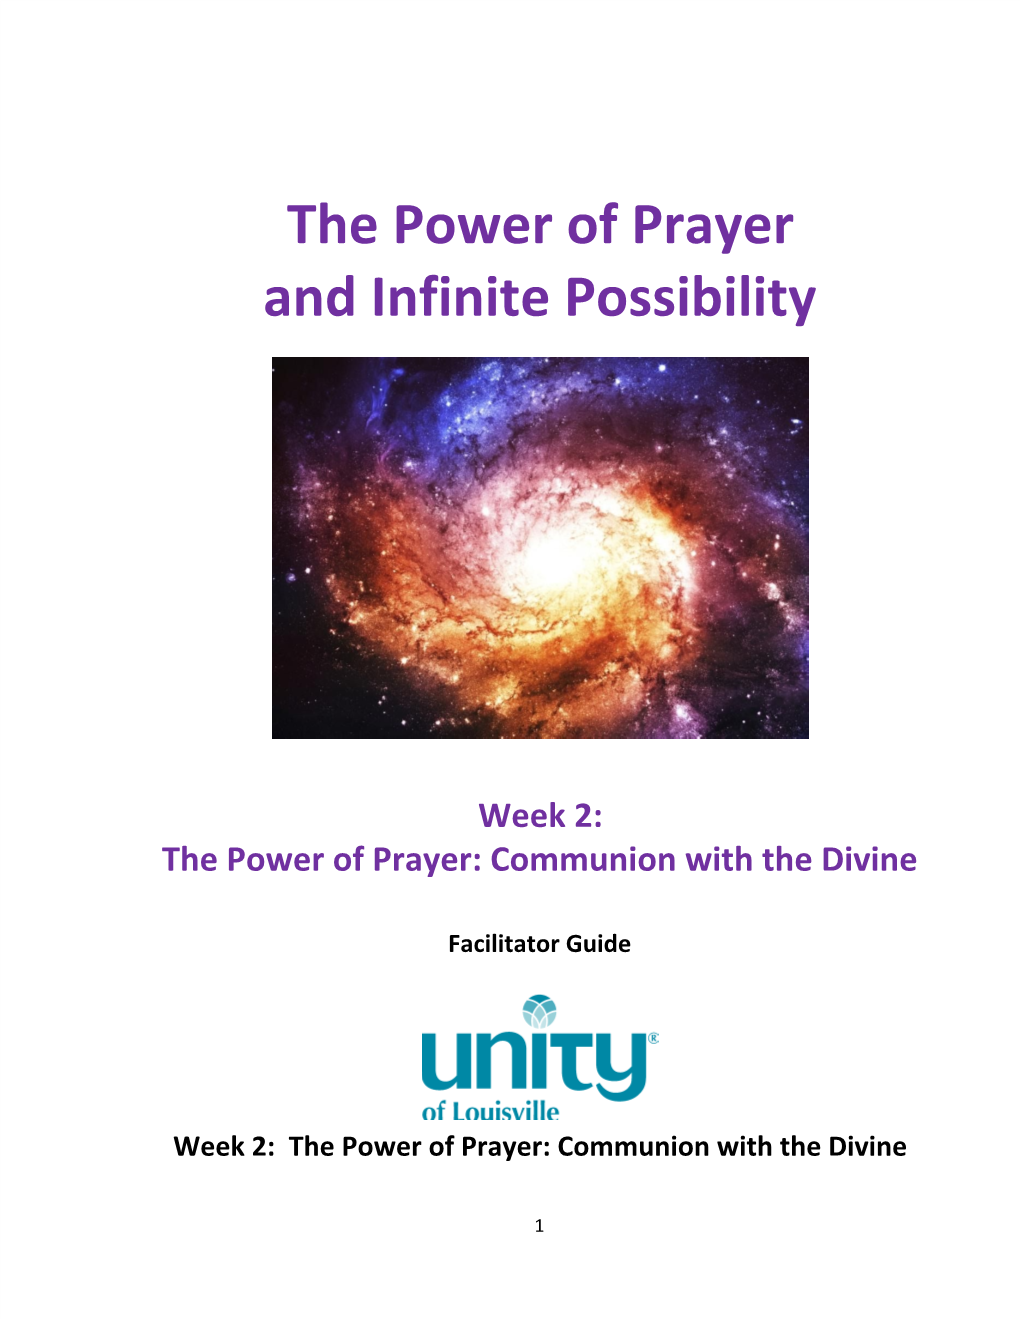 The Power of Prayer and Infinite Possibility